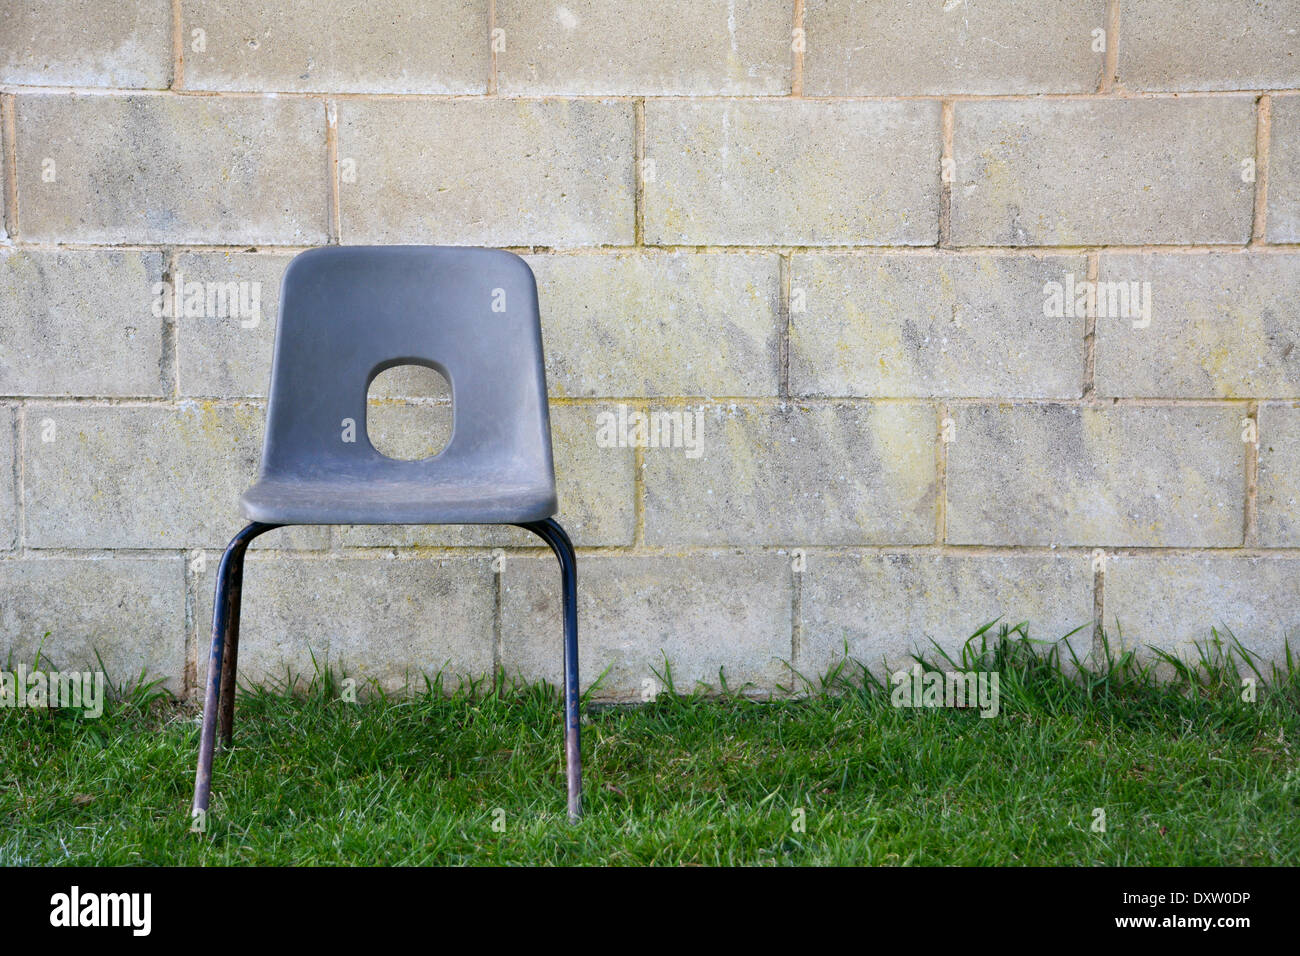 Abandoned empty plastic chair on grass in front of a concrete block wall Stock Photo